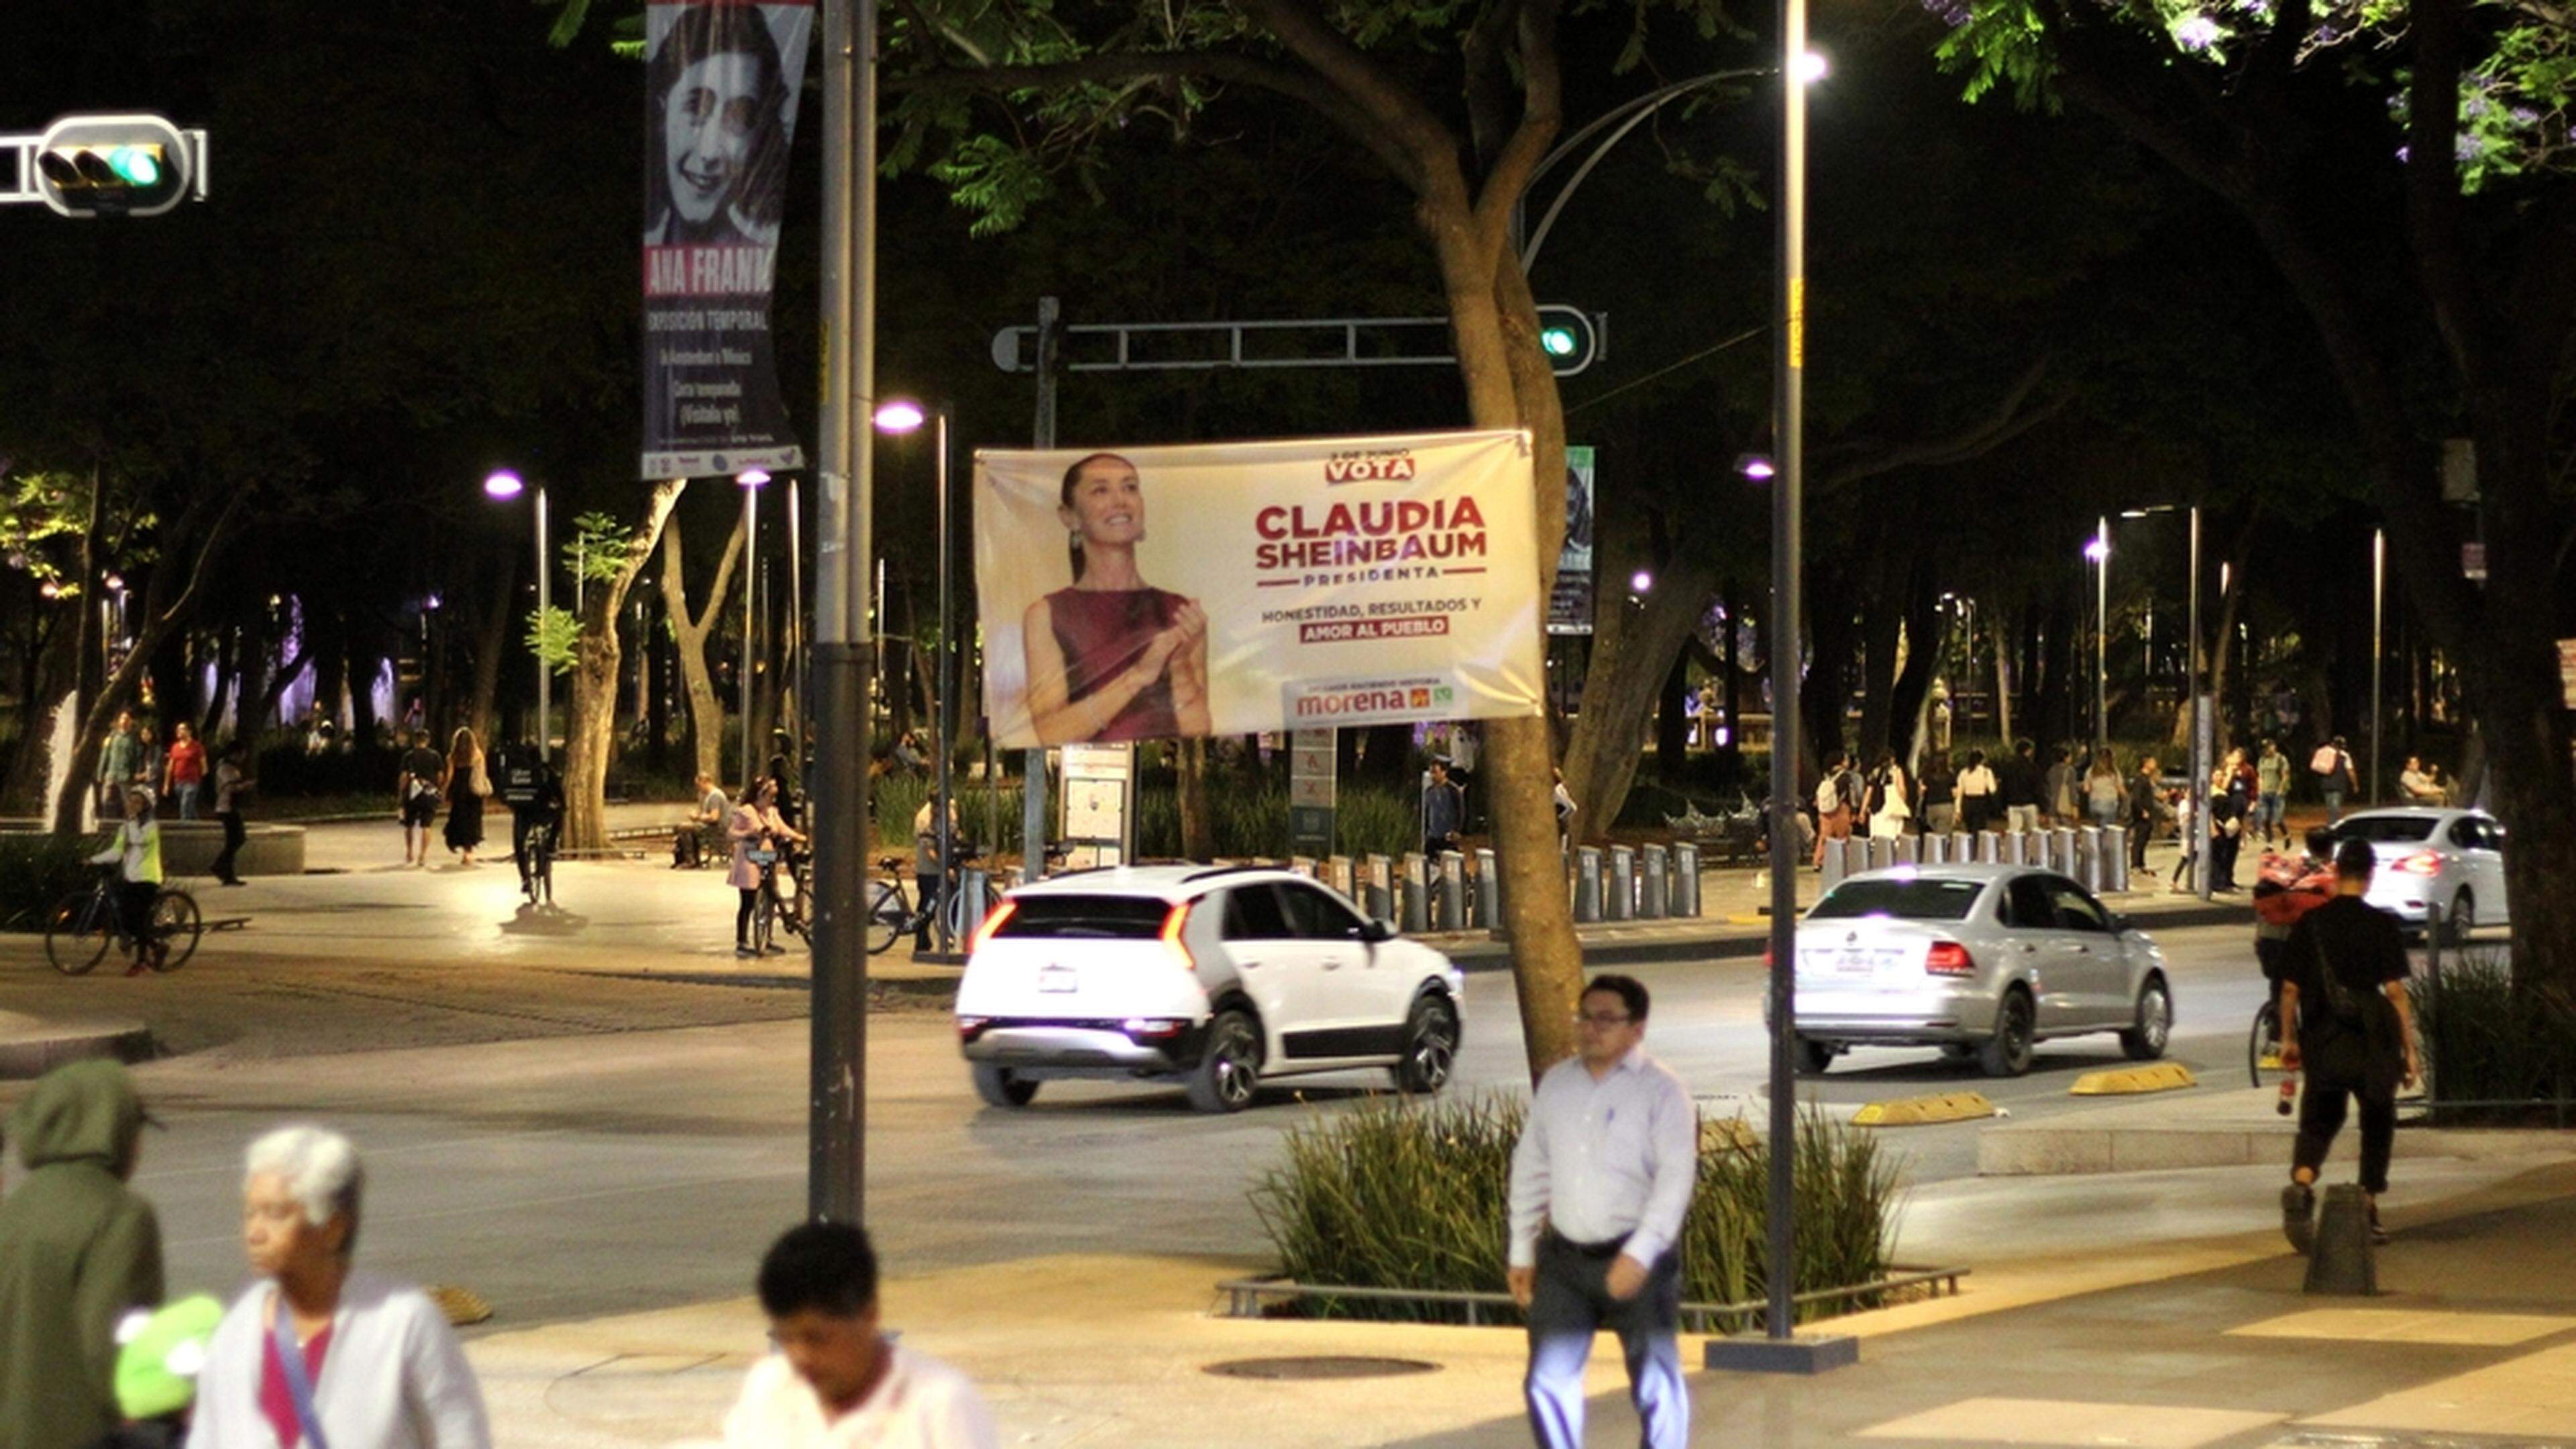 Presidential political campaign for the June elections showing candidate Claudia Sheinbaum for the Morena Party